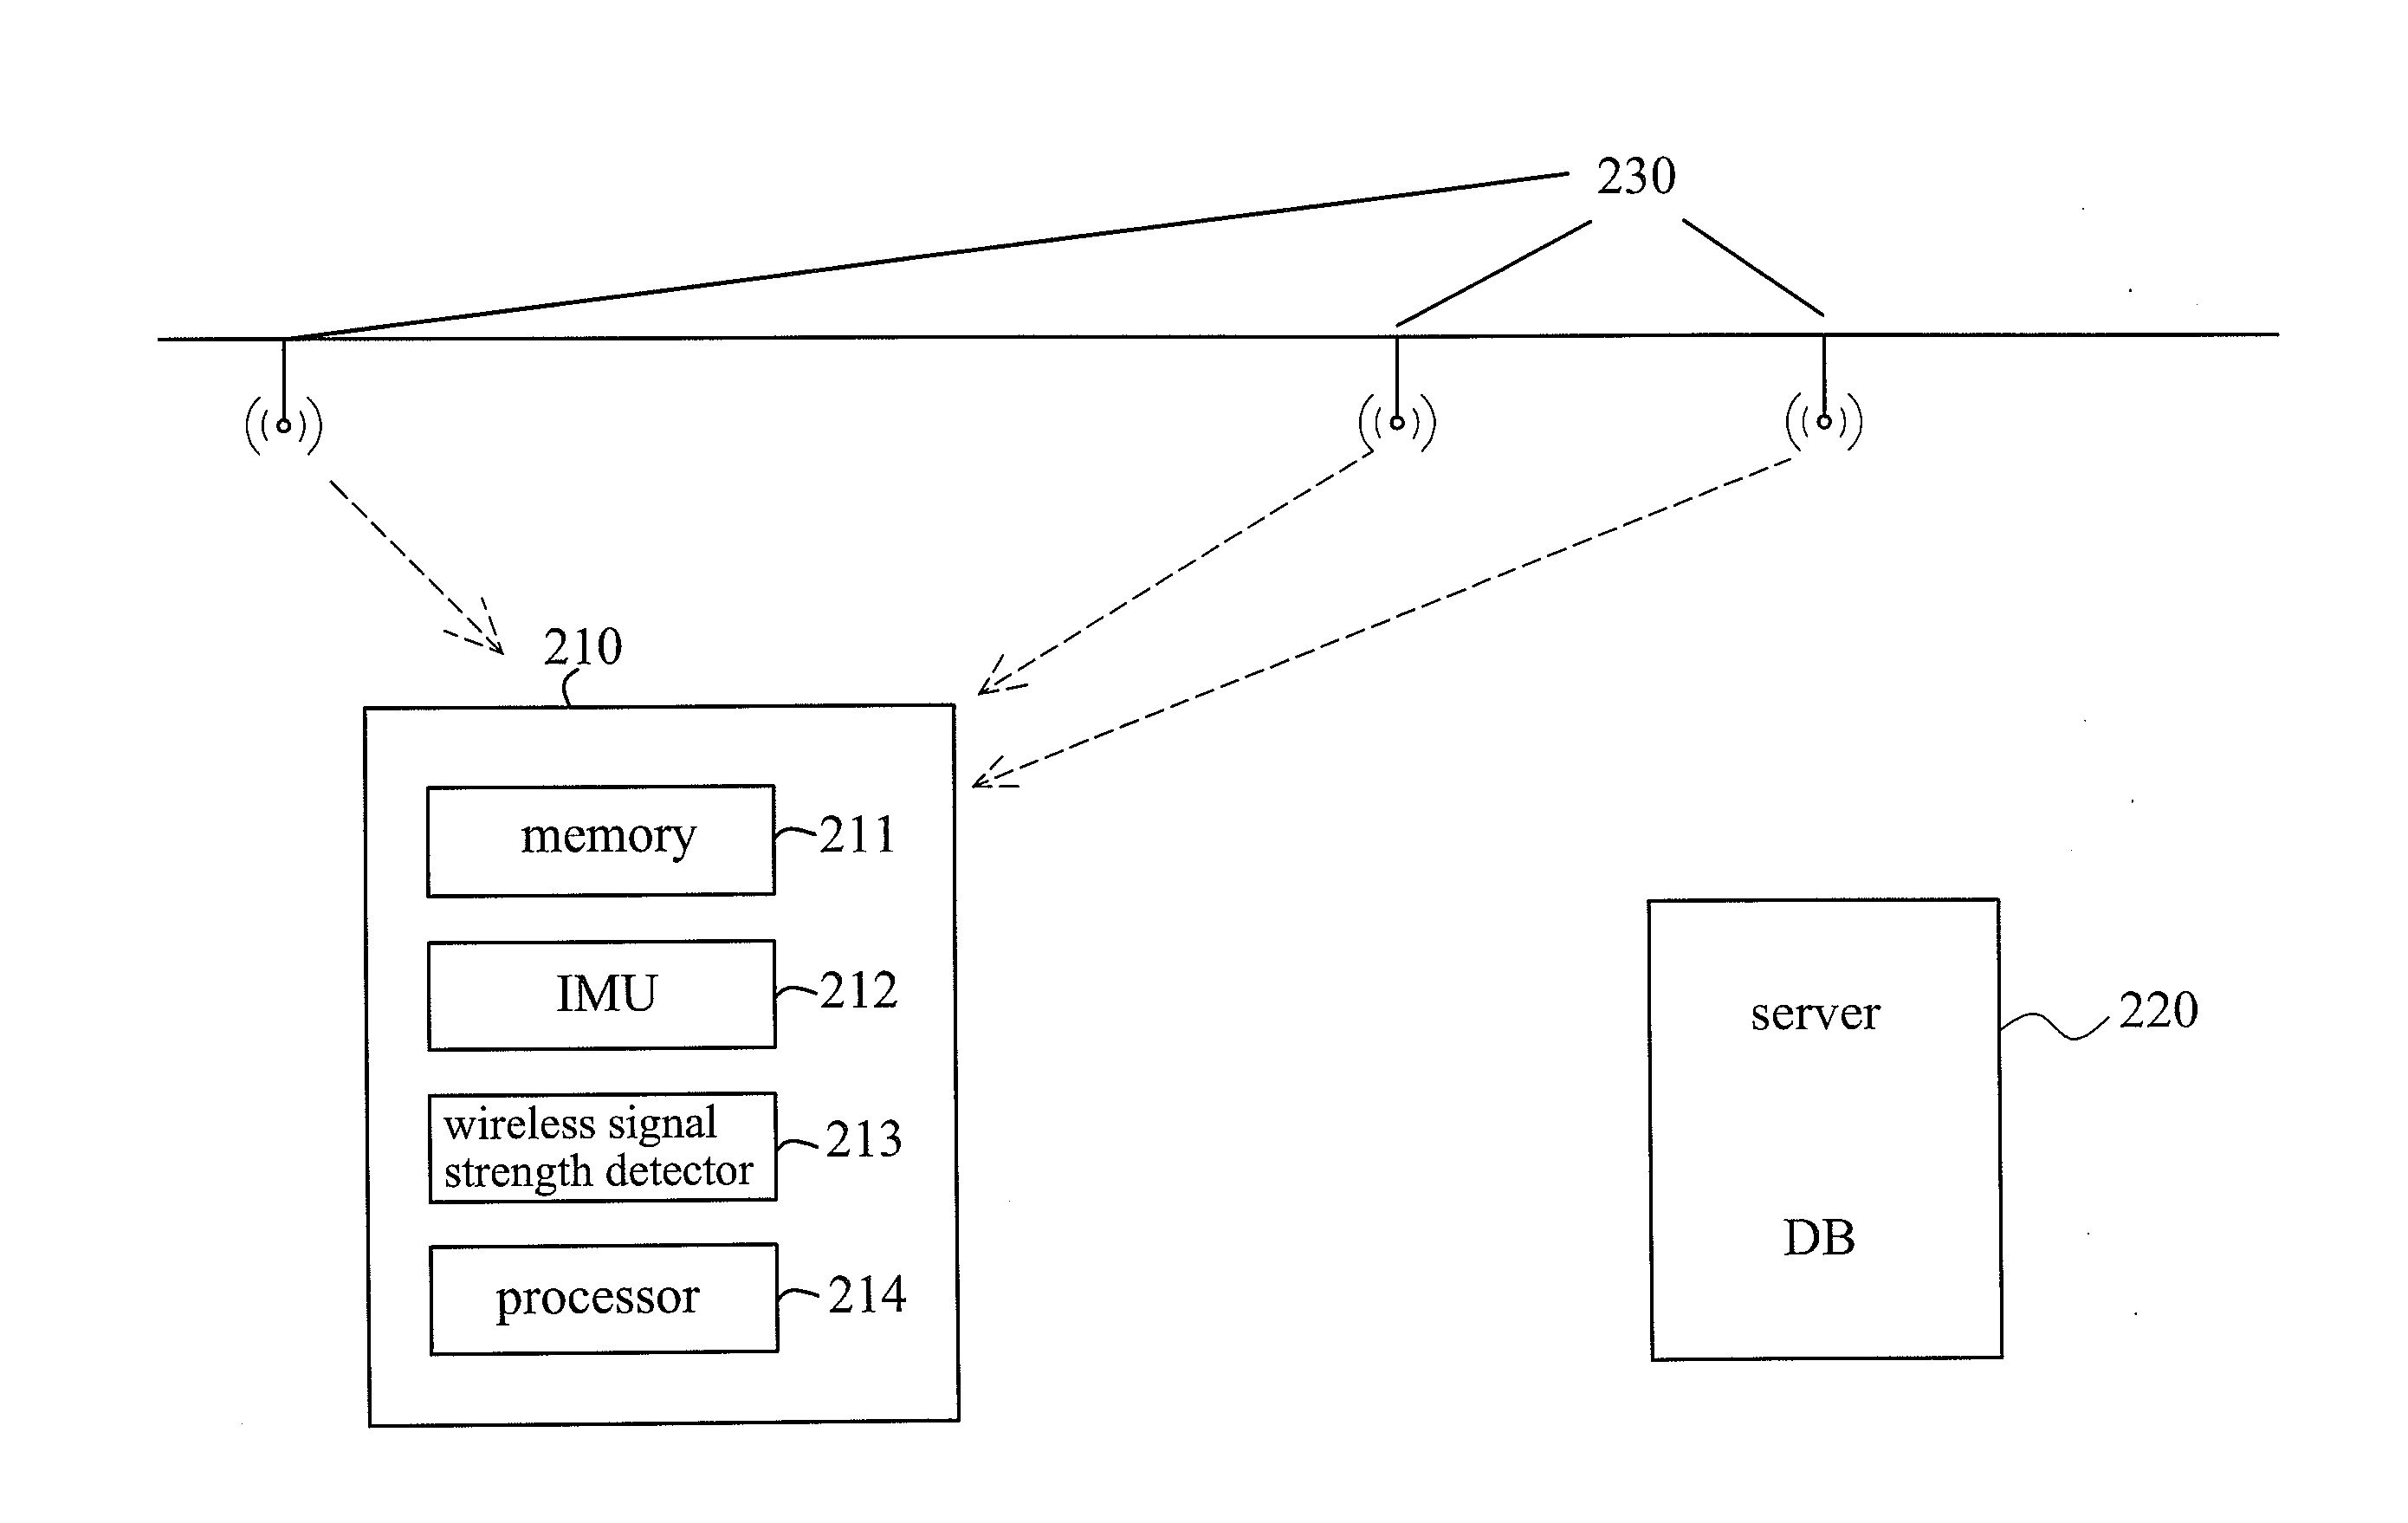 Method of Positioning Using Wireless Signals and Inertial Measurement Units, Electronic Device, and Positioning System Using the Same Method